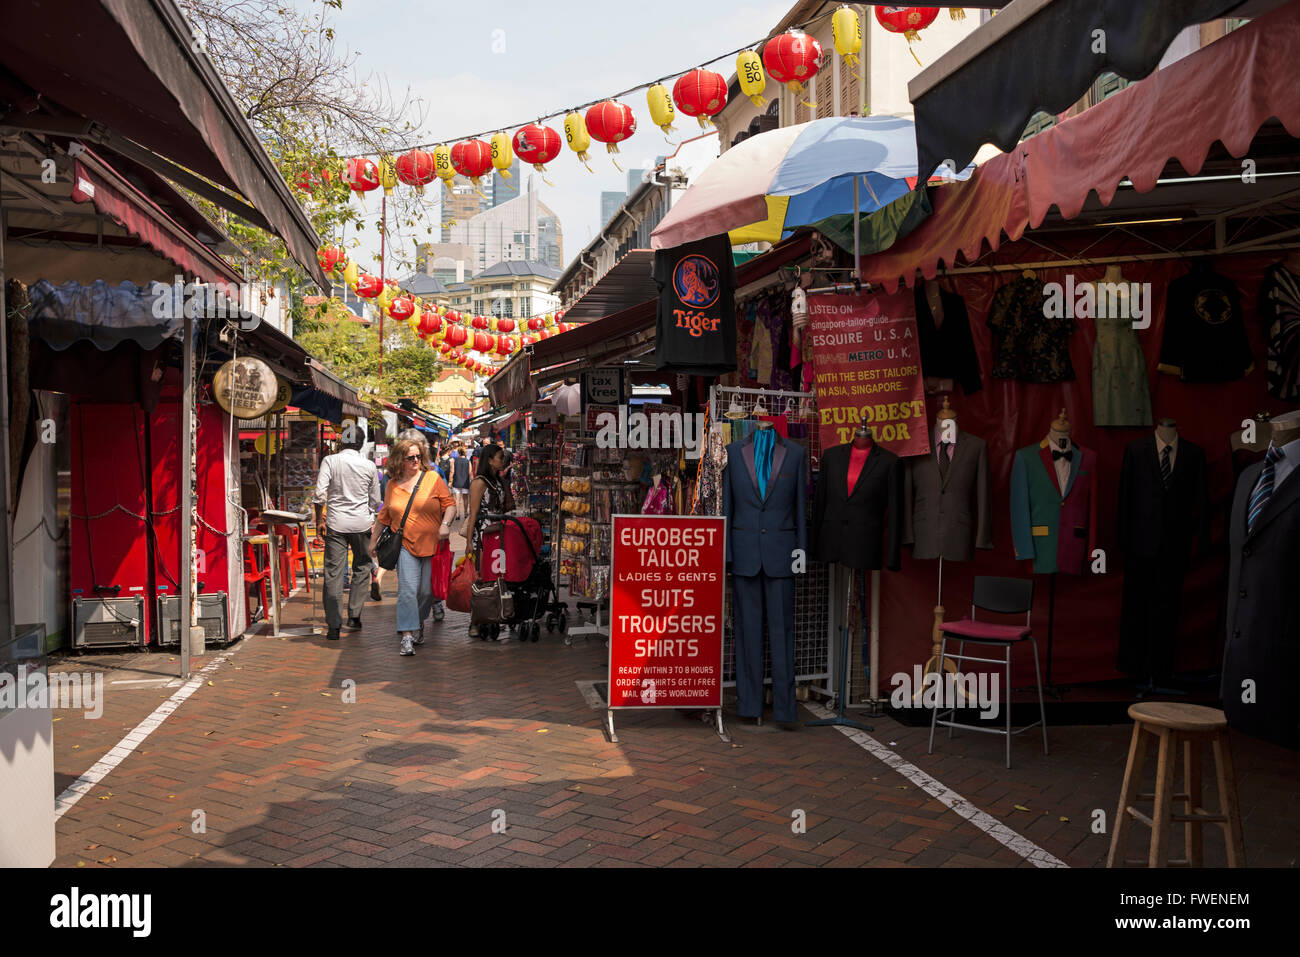 Tailor shops on Pagoda Street in Chinatown, Singapore Stock Photo